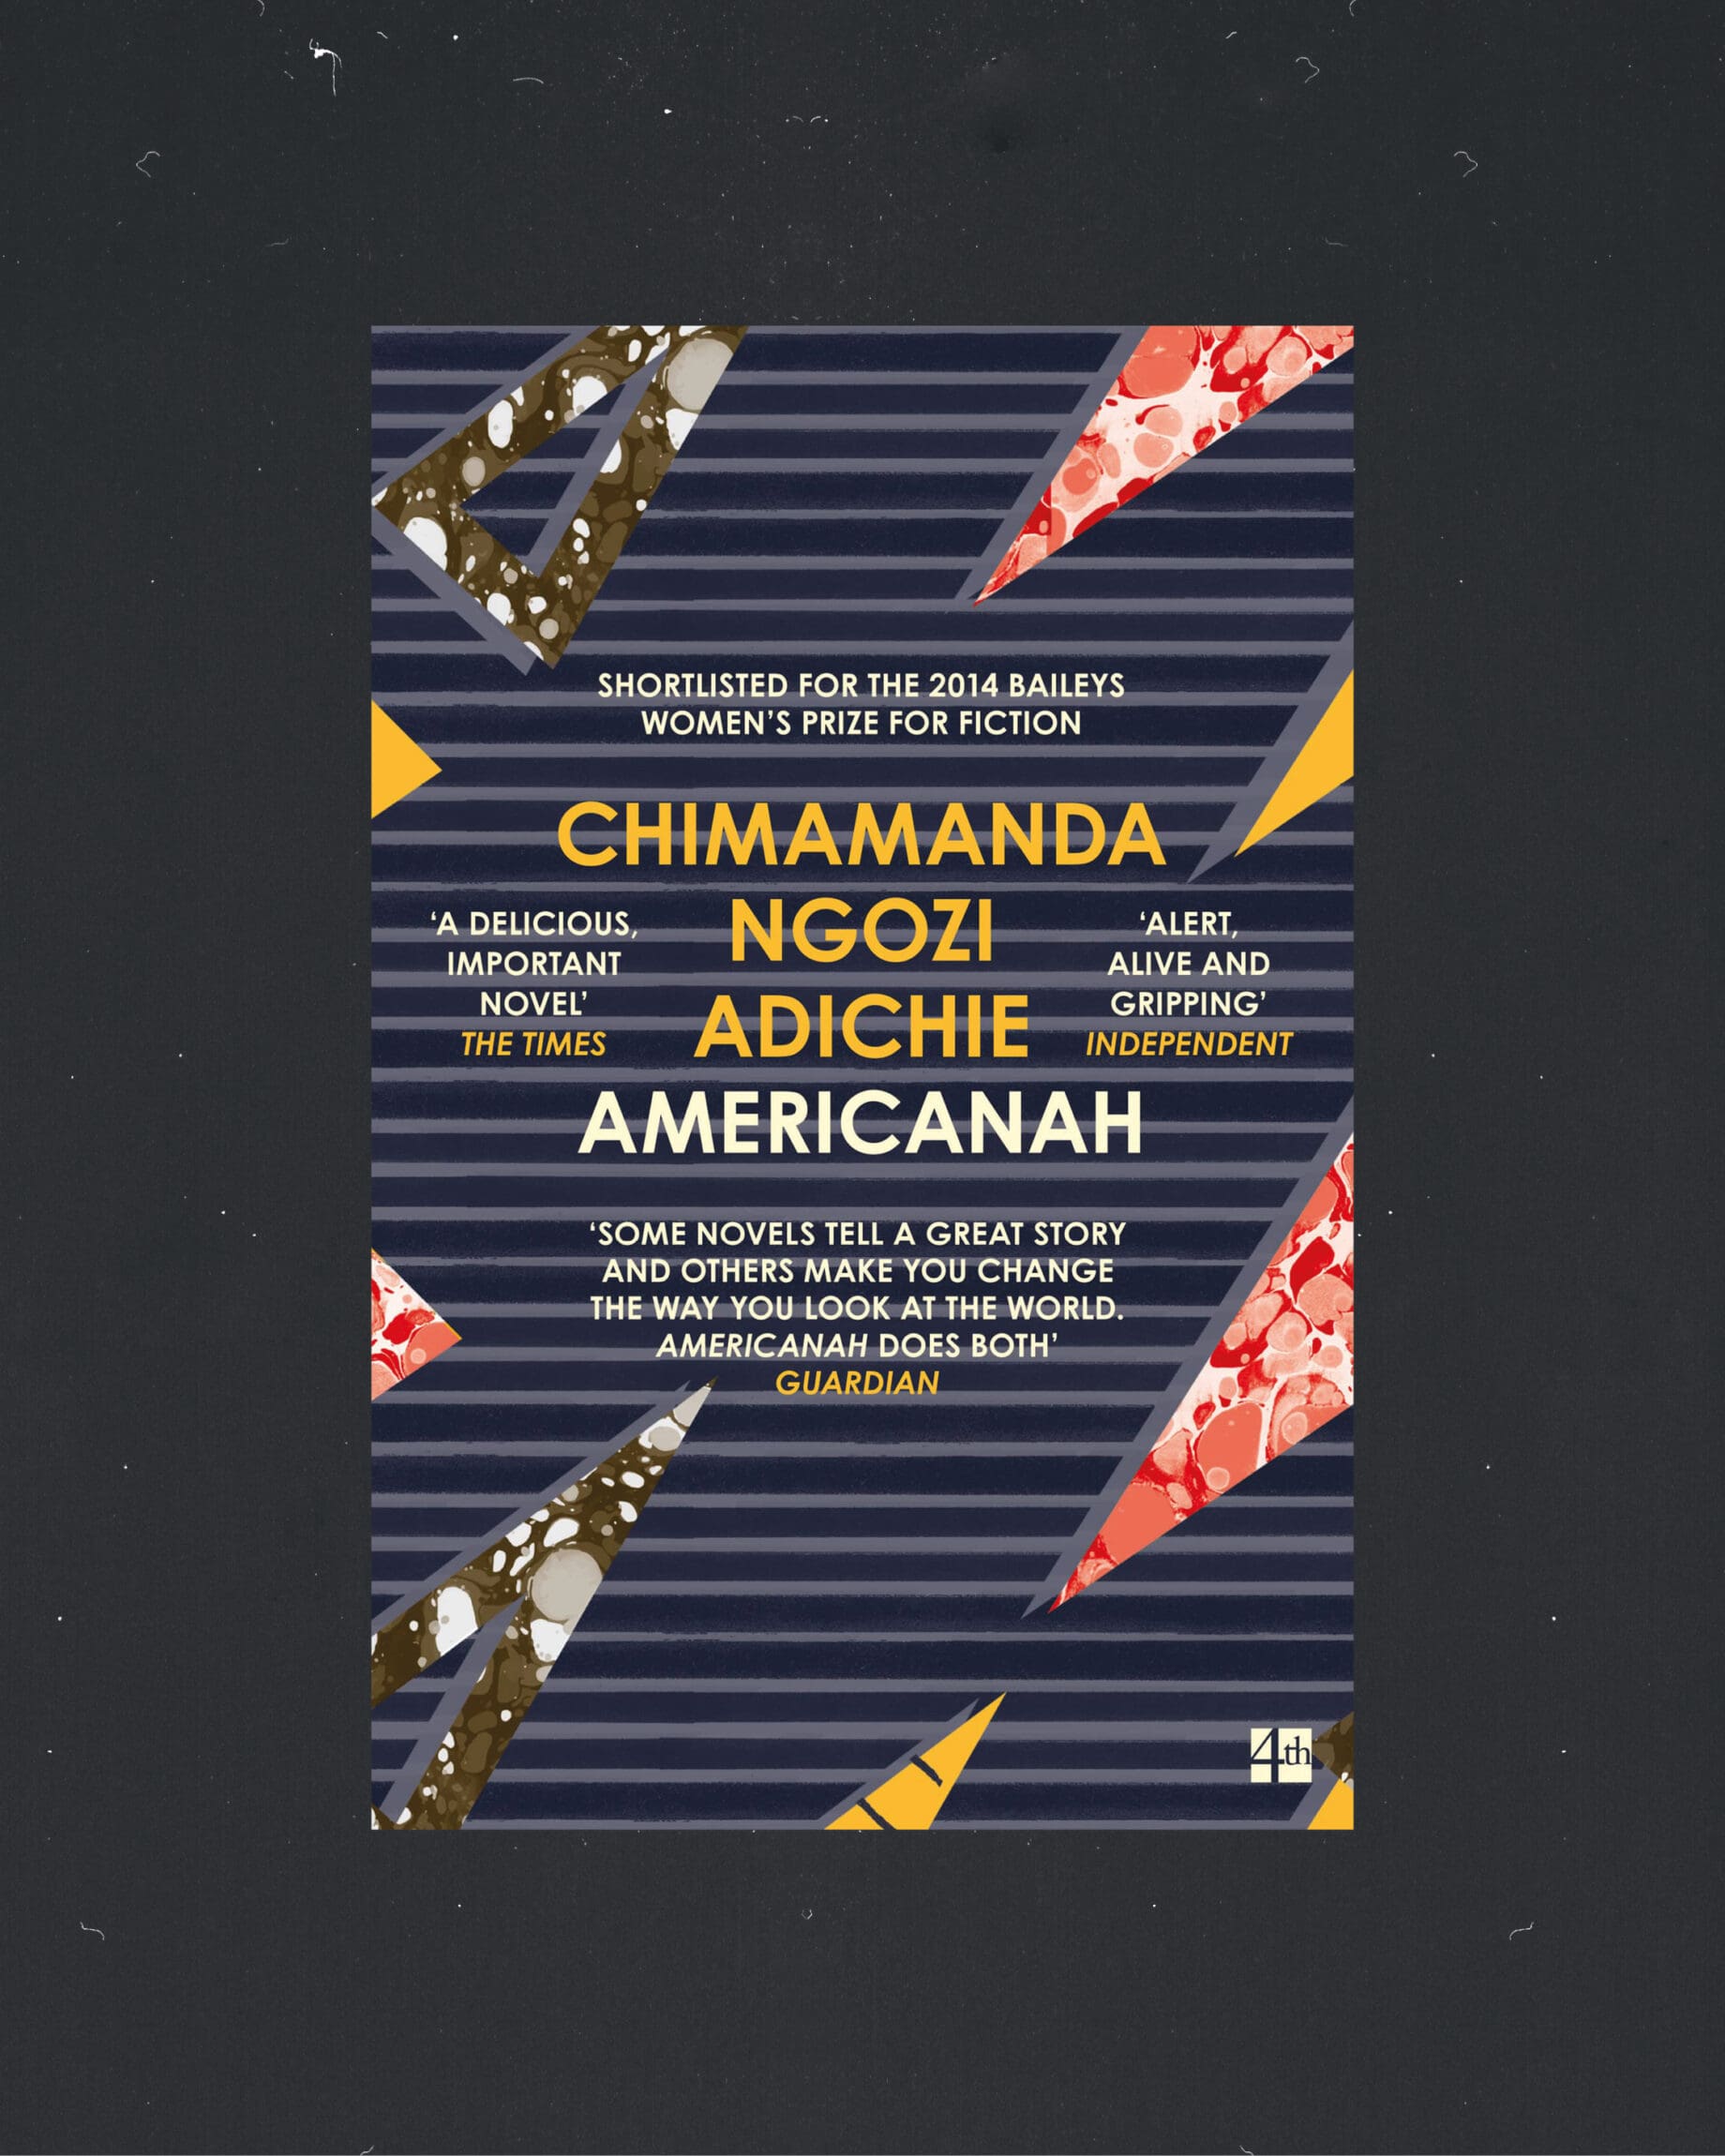 A Yoruba girl’s guide to the holiday season in Lagos | The book cover for Chimamanda Ngozi Adichie's 'Americanah'